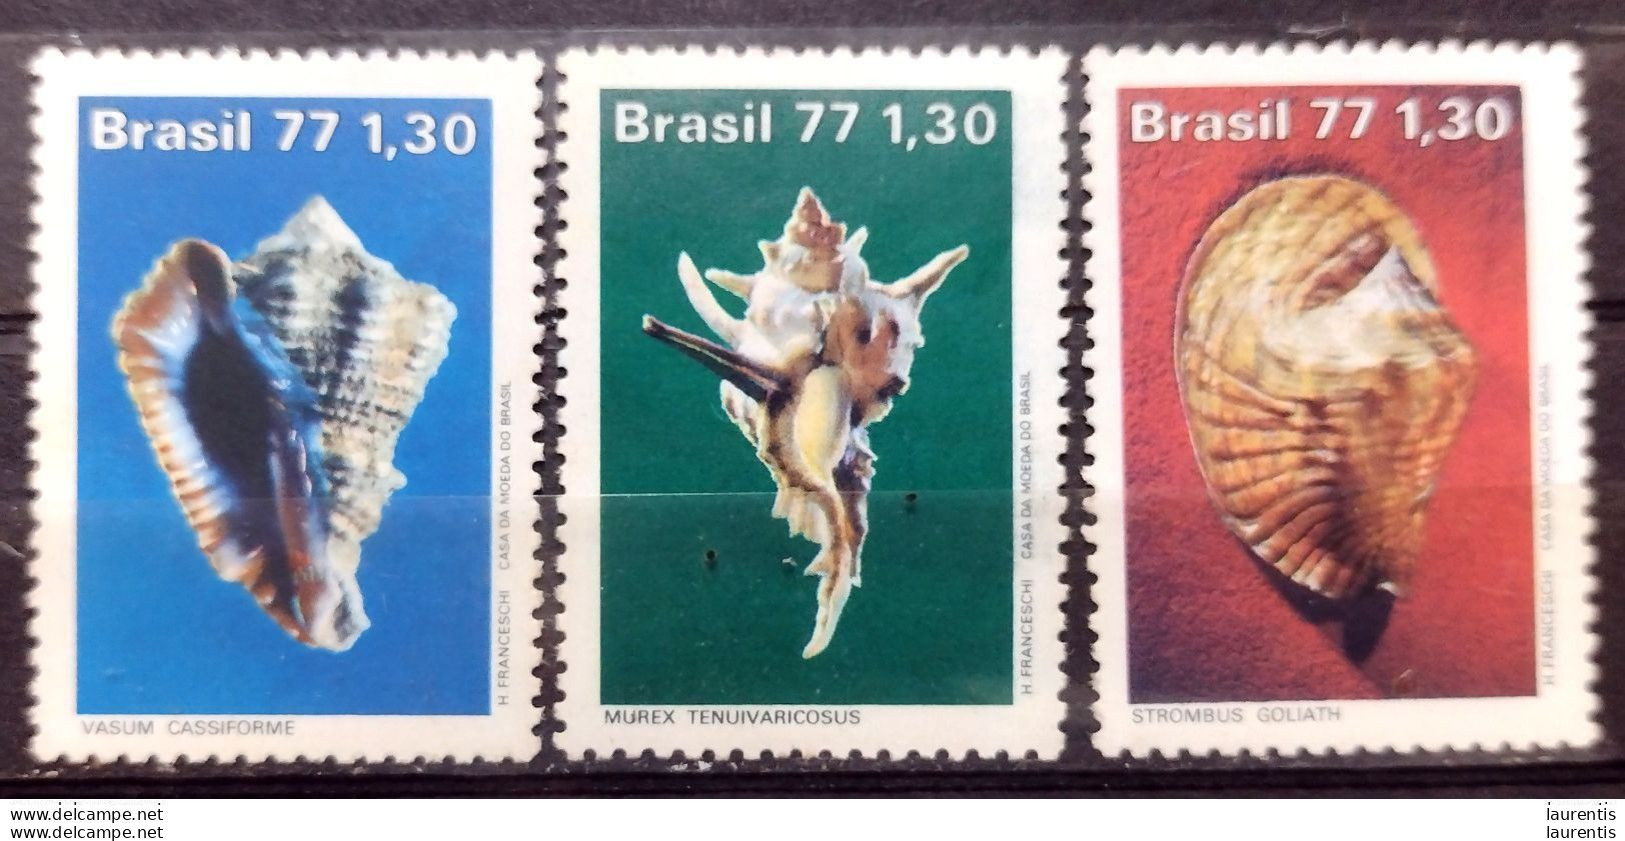 D2599  Shells - Coquillages - Brasil 1977 - MNH - 1,75 (20-270) - Coquillages